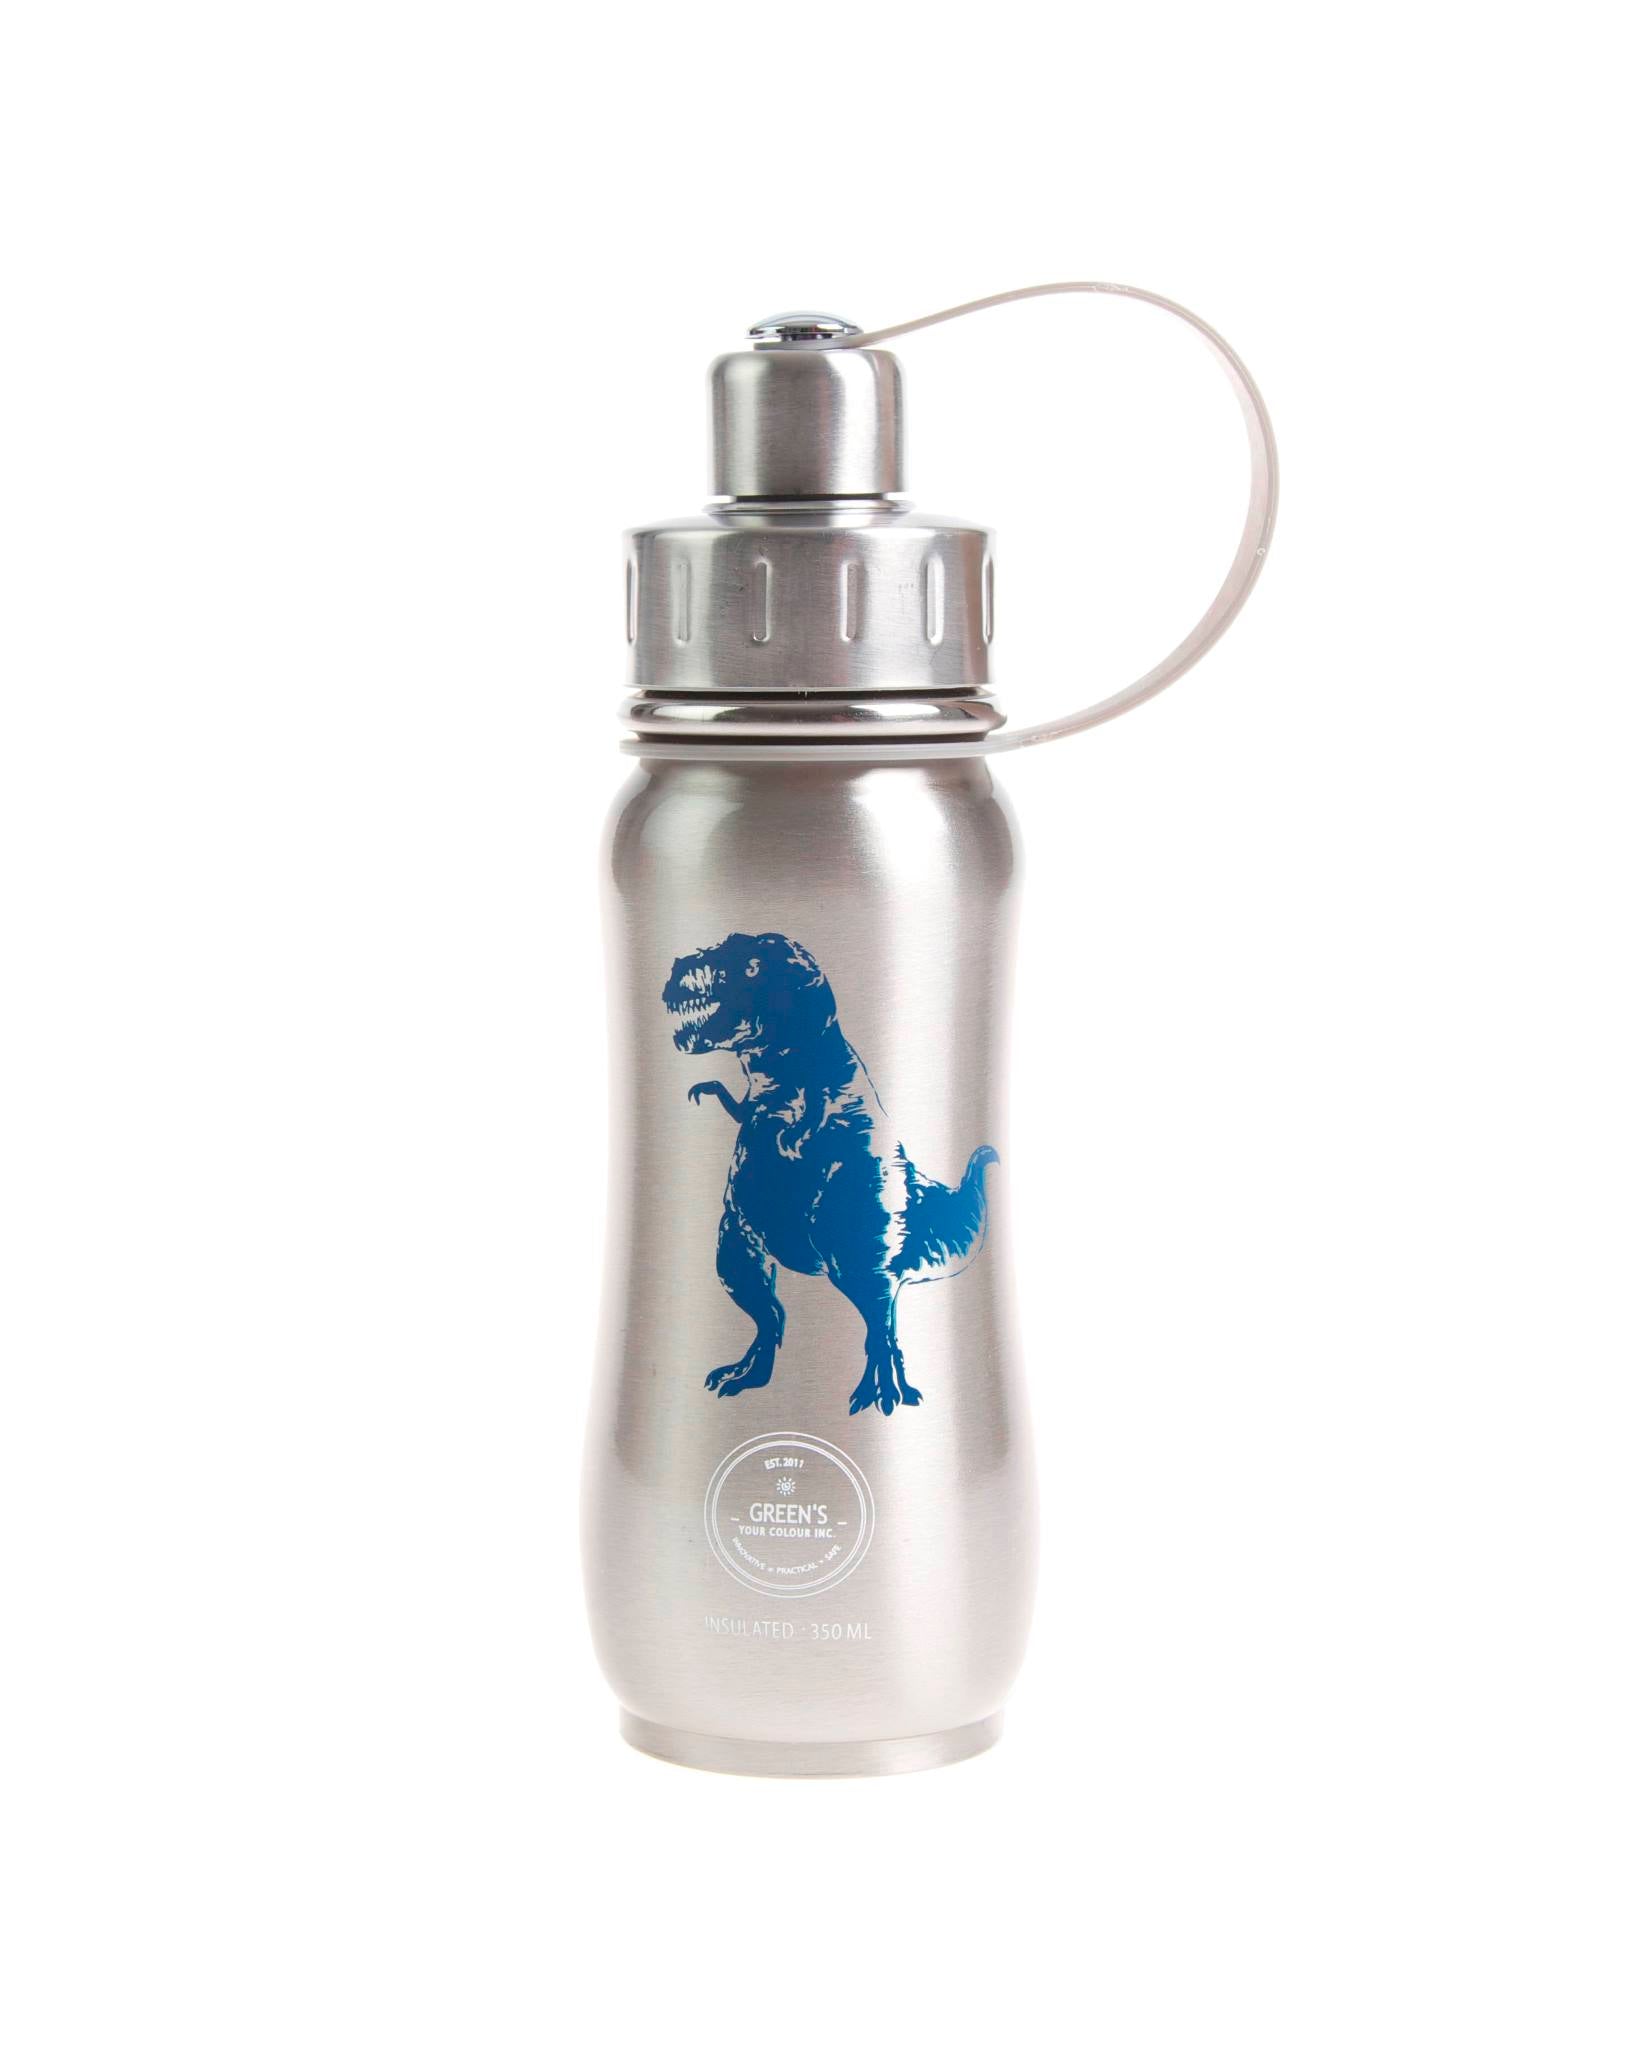 350 ml 'Dino Stomper' Silver Blue Dinosaur insulated vacuum stainless steel water bottle greens your colour, gycbottle sustainable water bottle sustainable brand Canadian Sustainable products, best water bottles, stylish water bottles, hot and cold bottles, tea bottle, kids bottles, best kids bottles, bpa free bottles, leak proof bottles, best back to school bottles